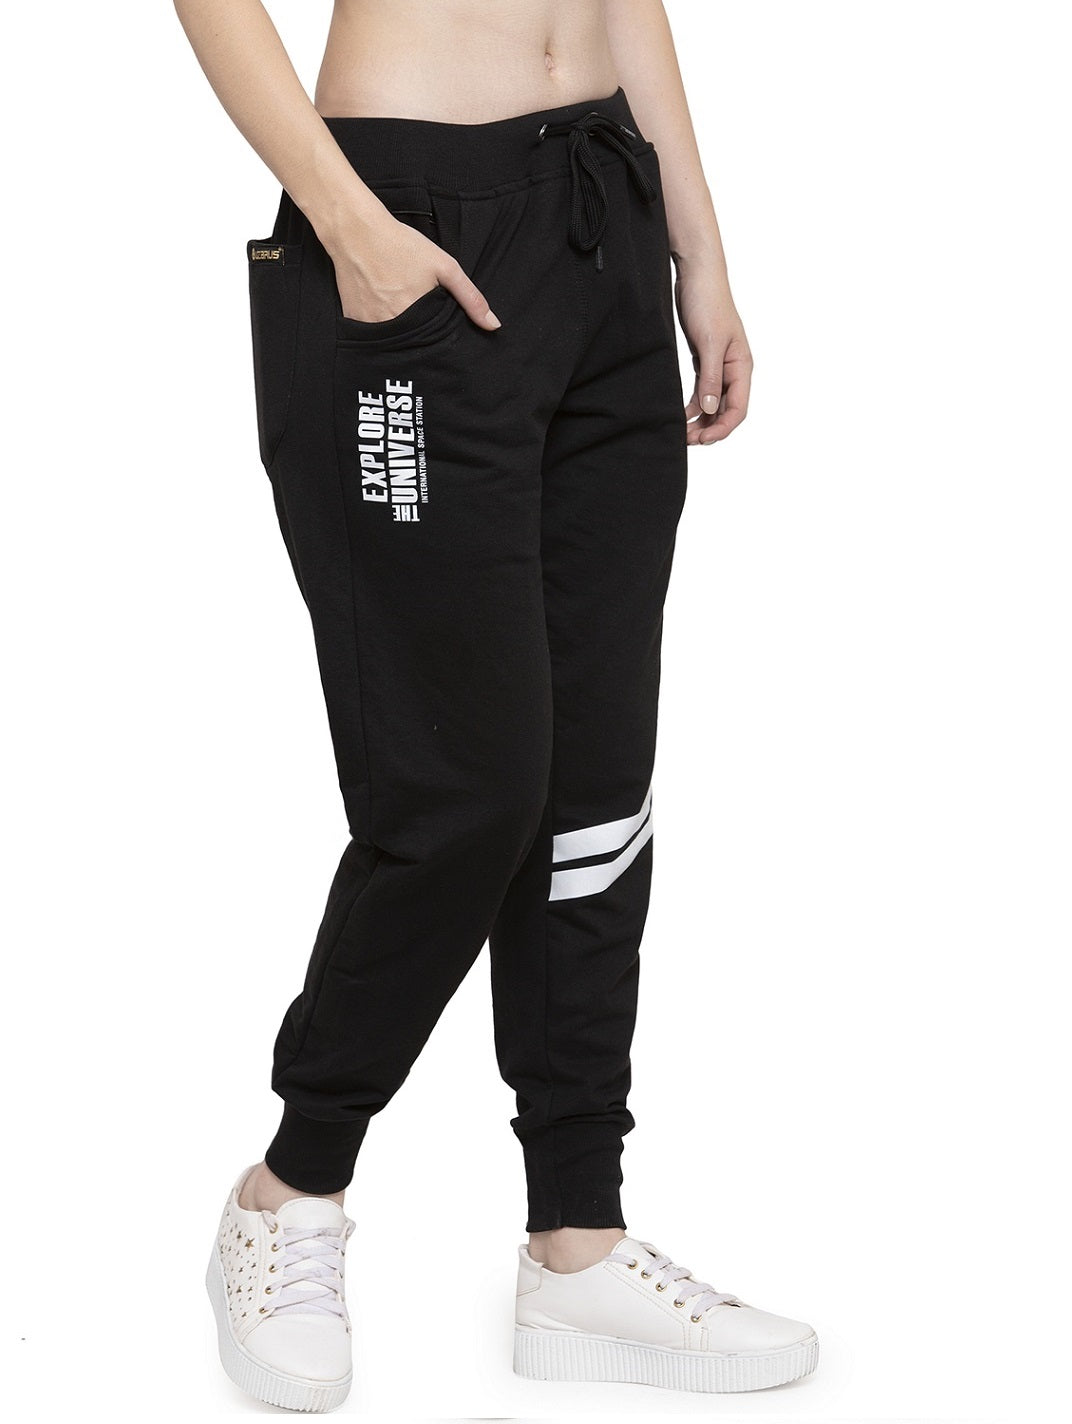 Track Pants For Women: Best Track Pants For Women In India - The